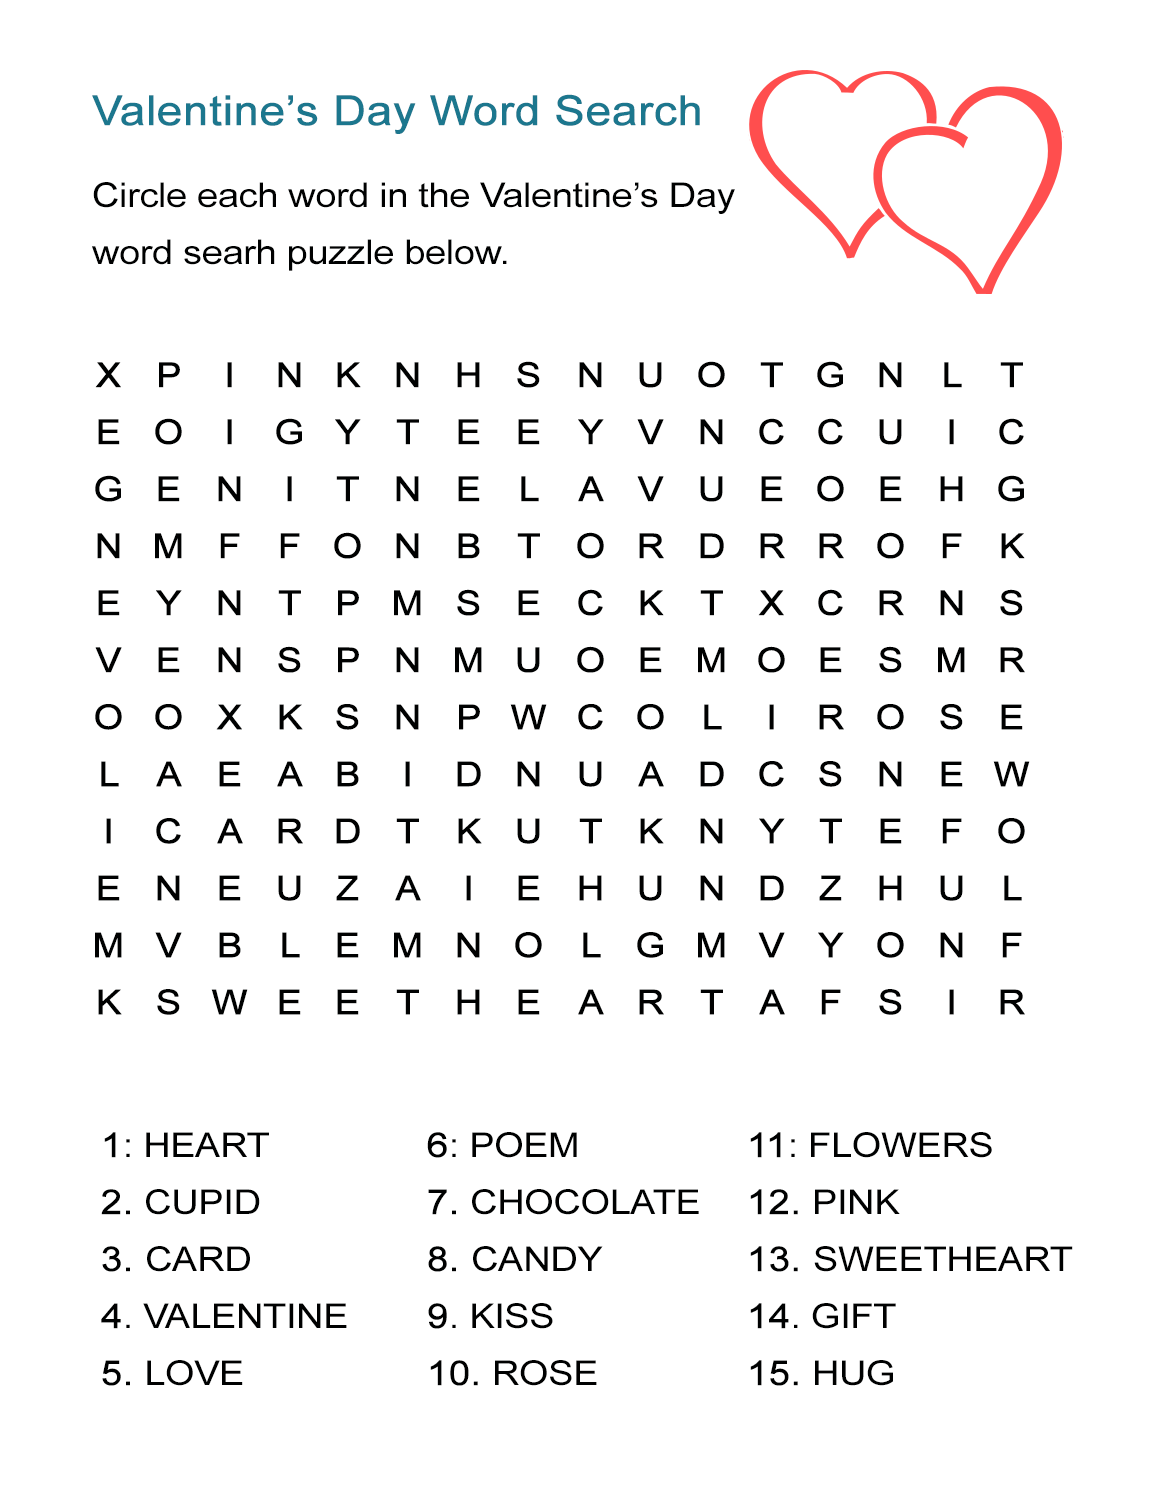 Valentine's Day Word Search Puzzle Free Worksheet for February 14